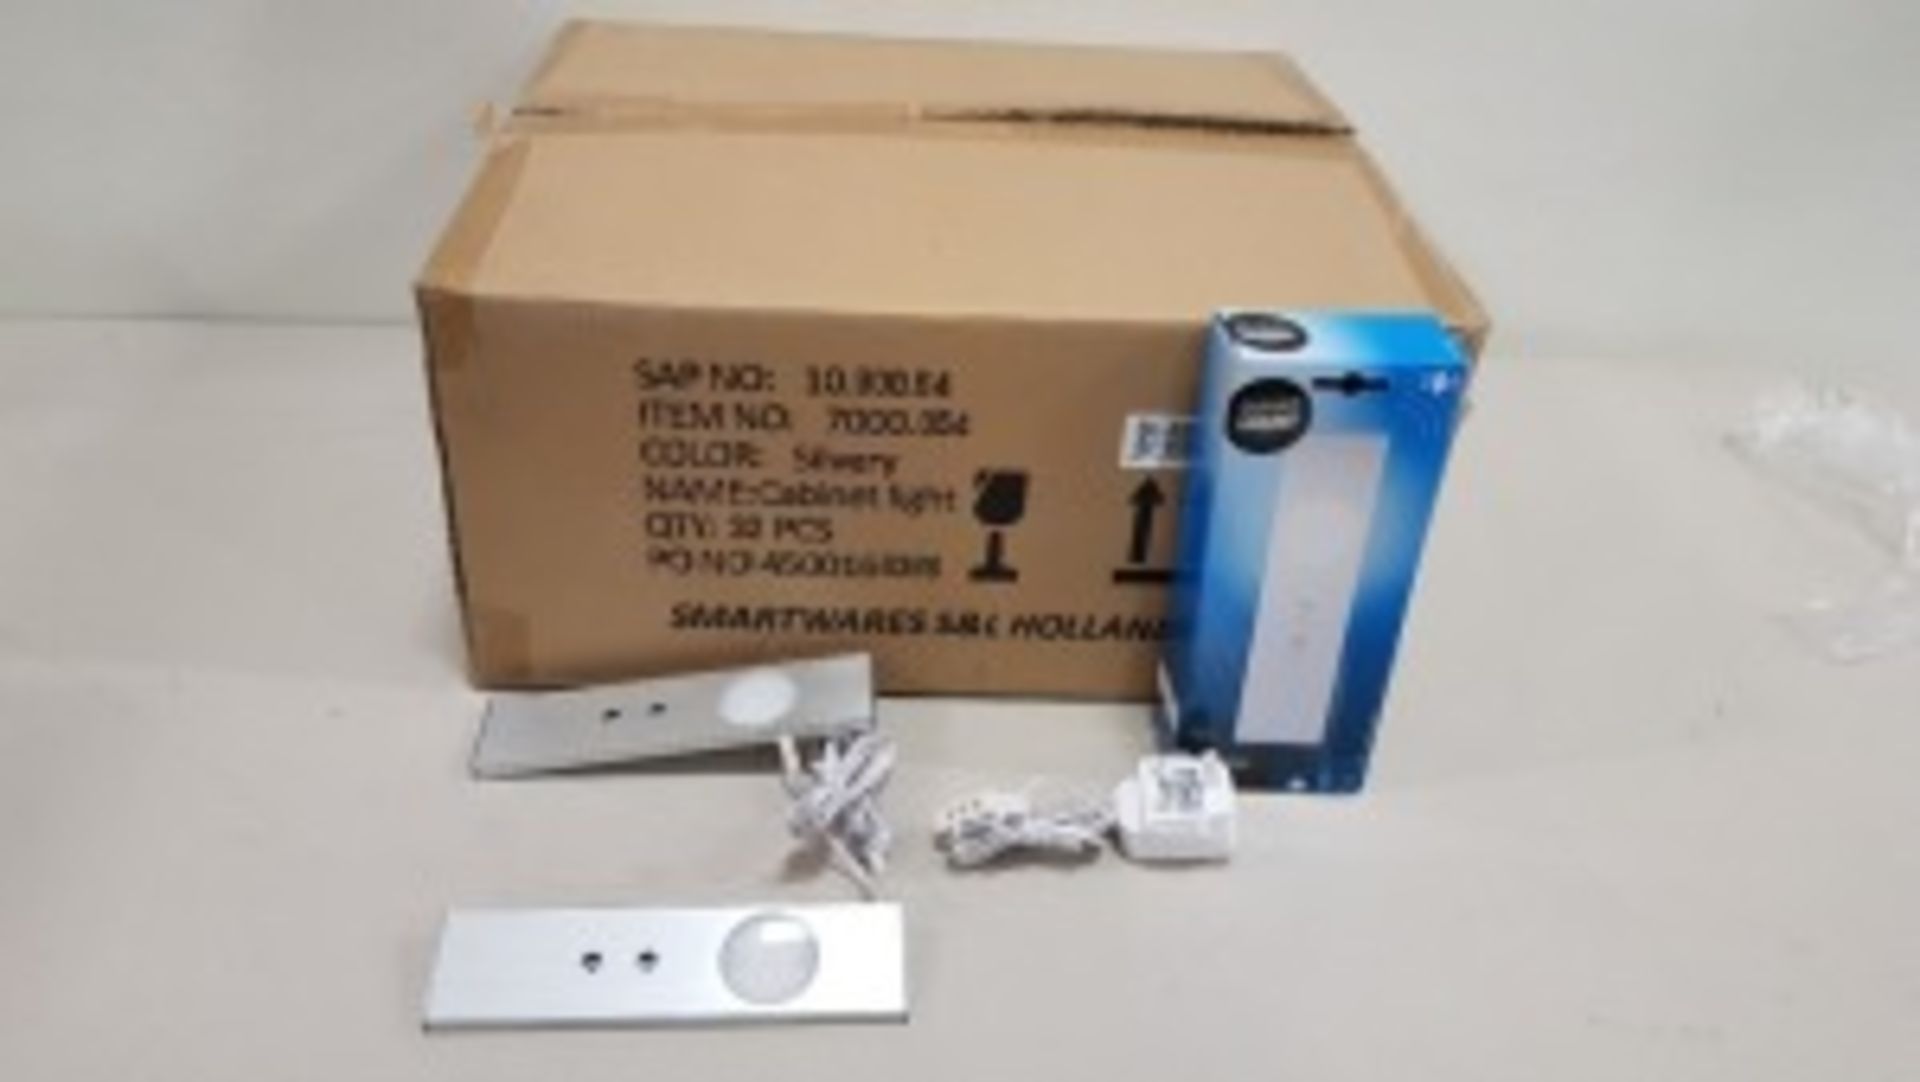 32 X BRAND NEW BOXED SMARTWARES LED UNDER CABINET LIGHT WITH WAVE SENSOR INCLUDED - PROD CODE 10.